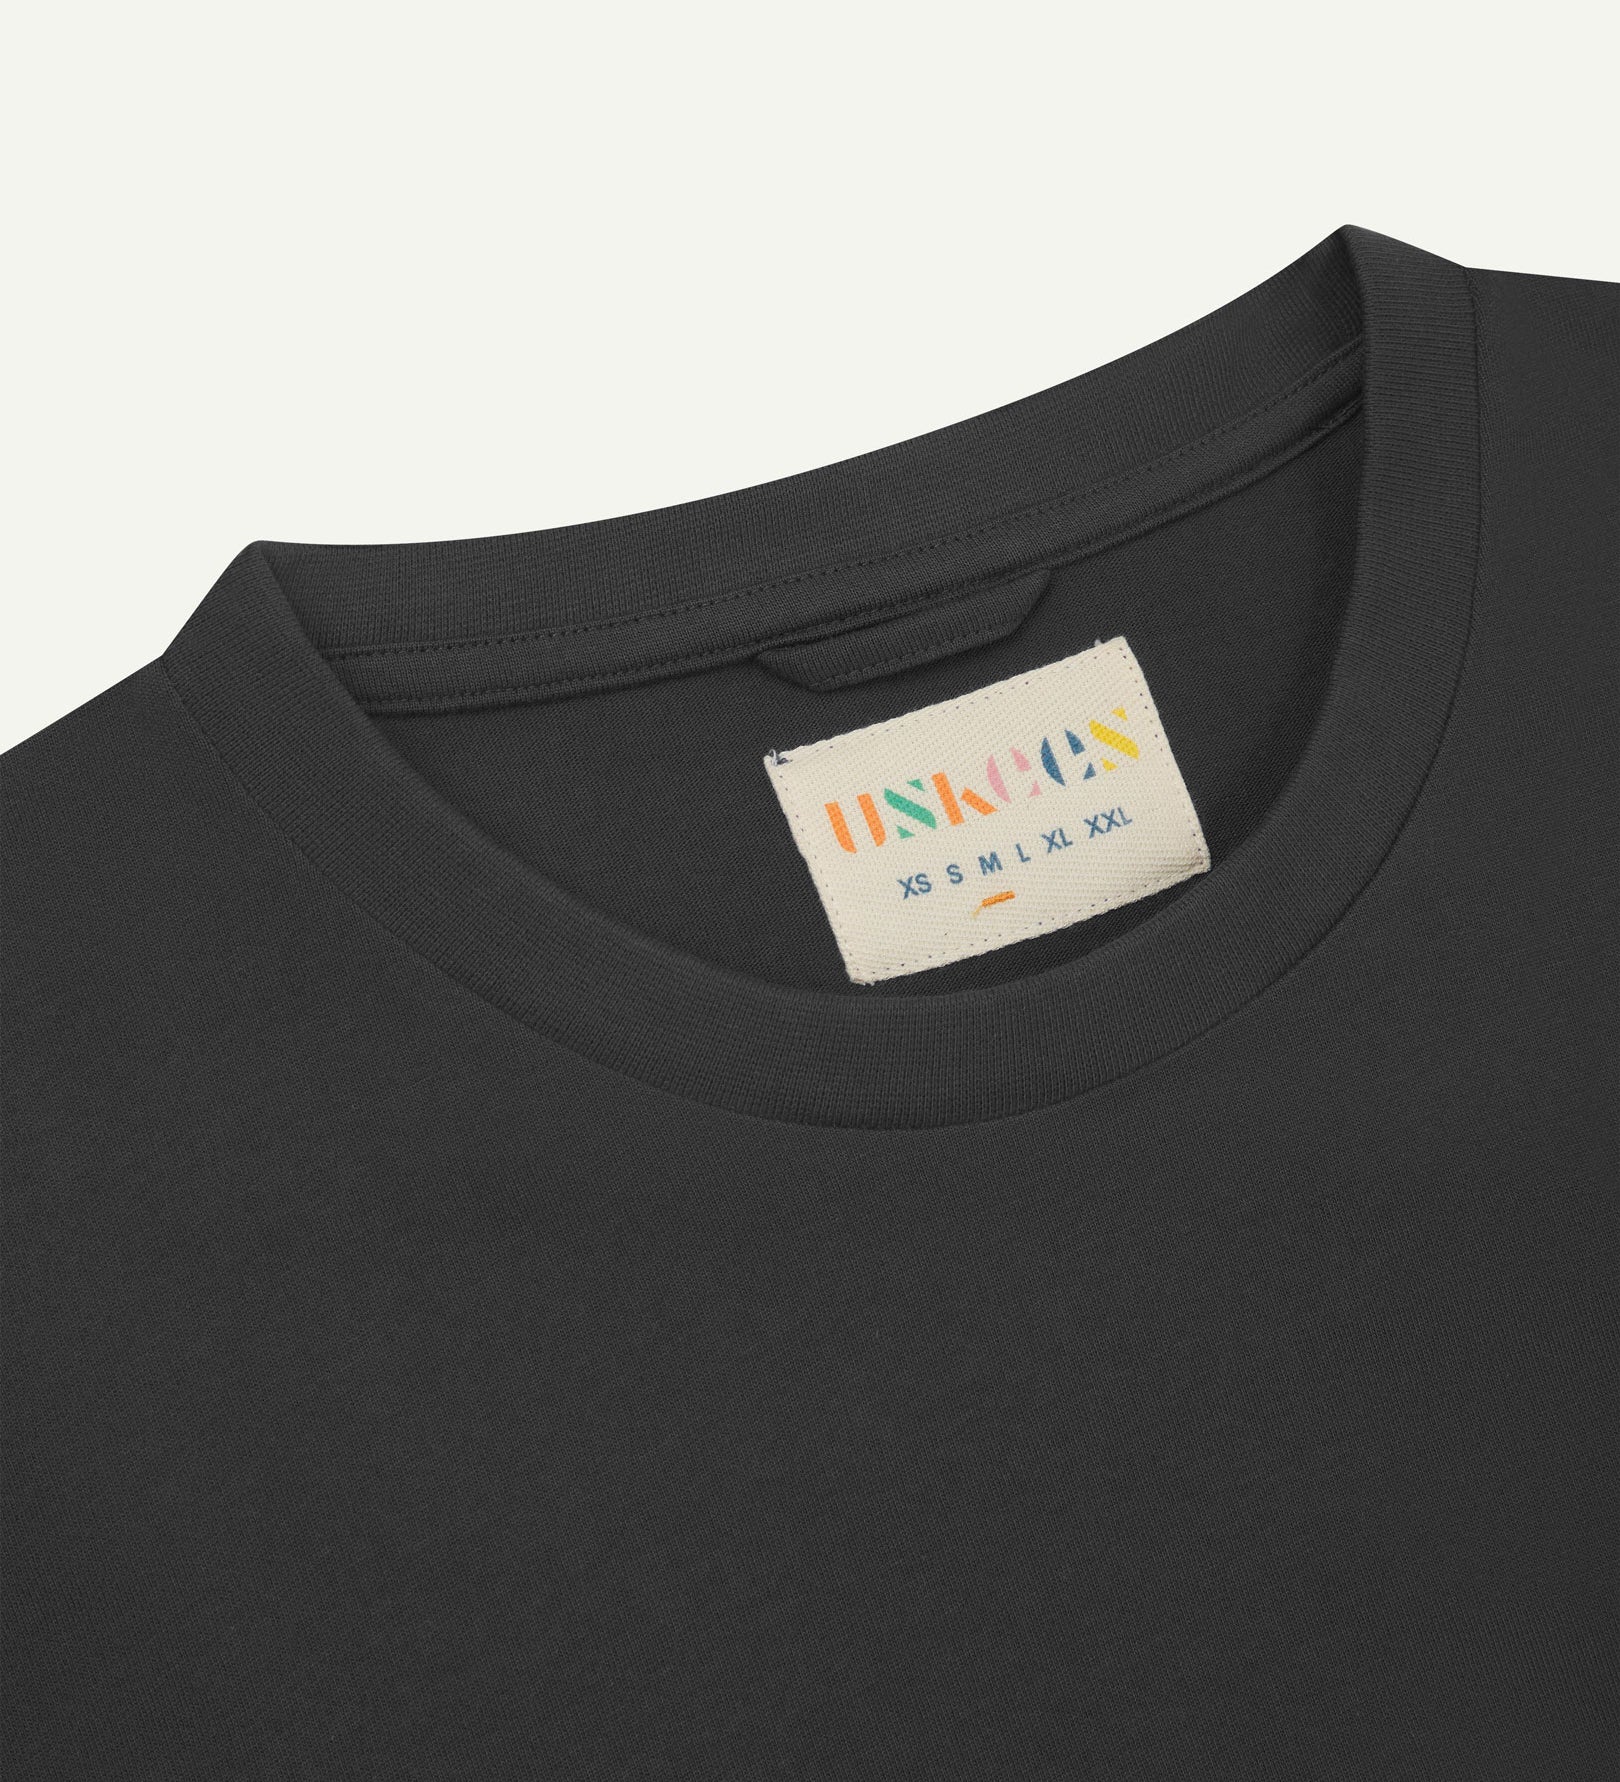 Neckline close-up of Uskees faded black organic cotton T-shirt showing hanging loop and branding label.